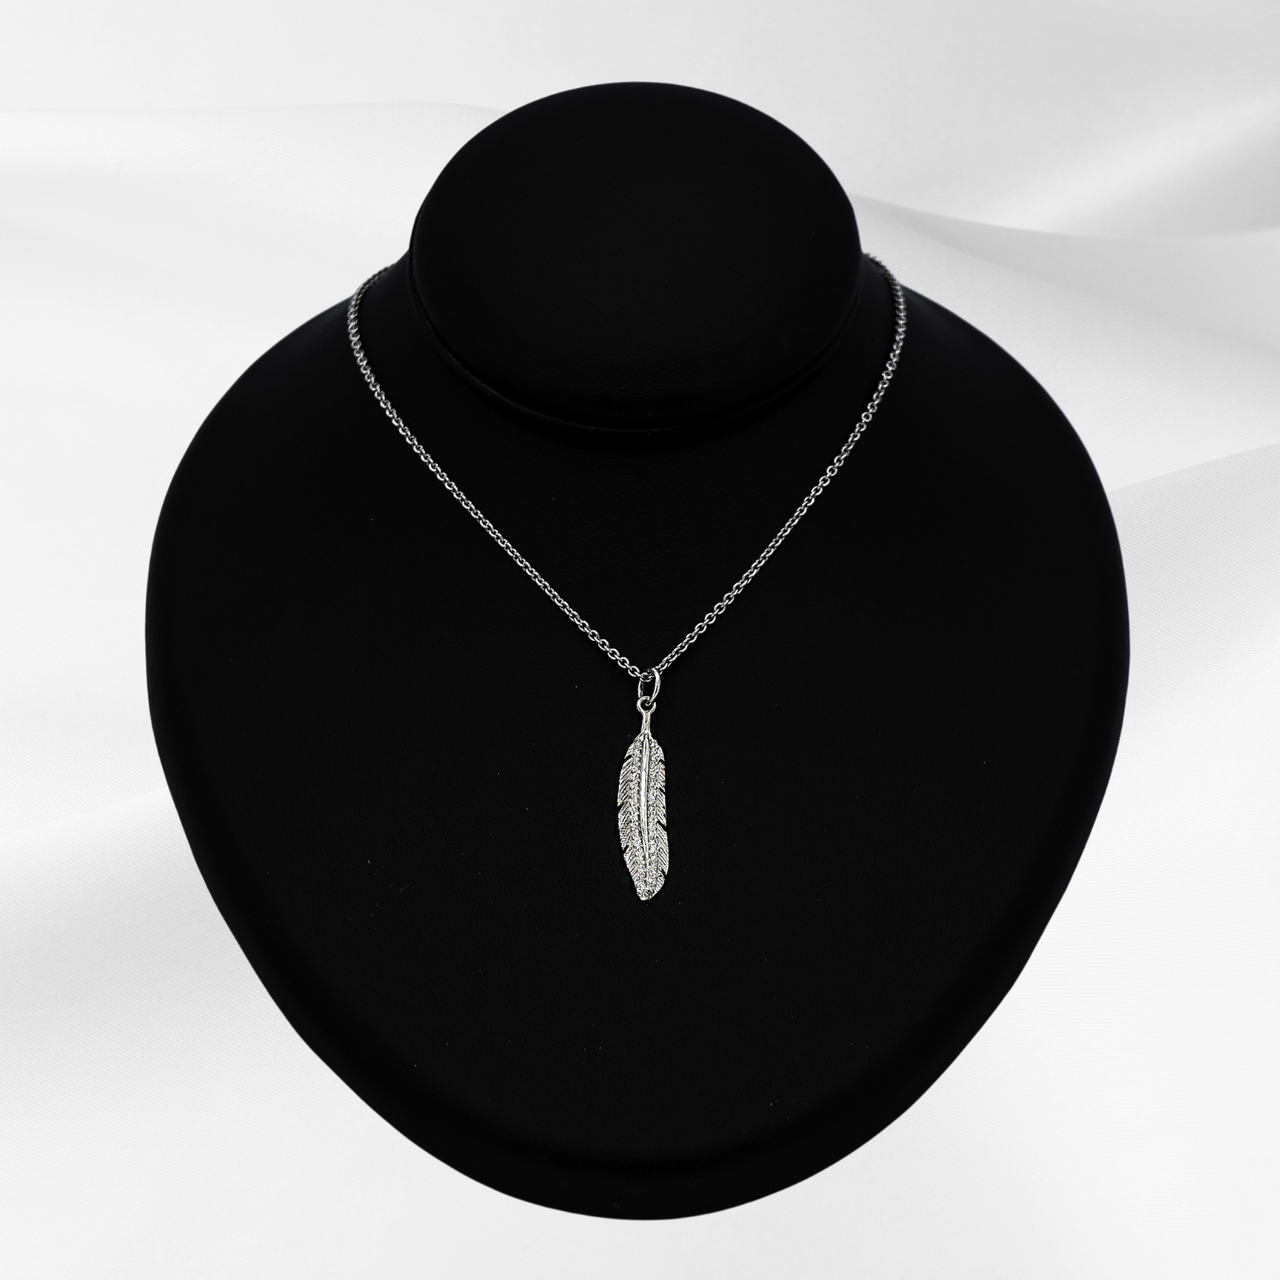 Soar with Joy™ Sterling Silver with Diamonds Pendant on an 18 inch chain necklace.